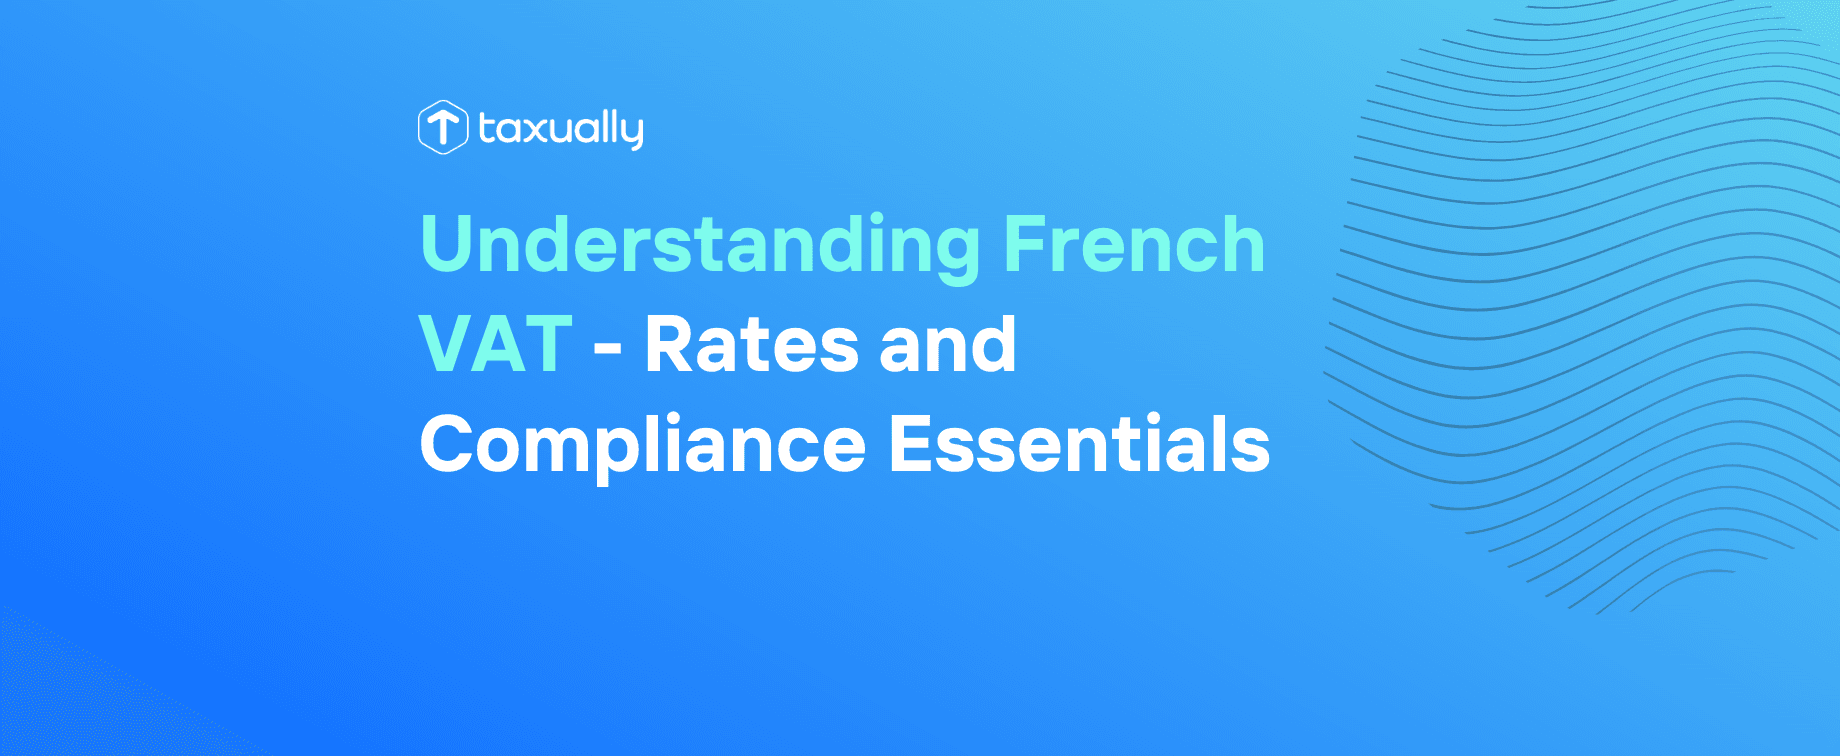 Taxually Understanding French VAT Rates and Compliance